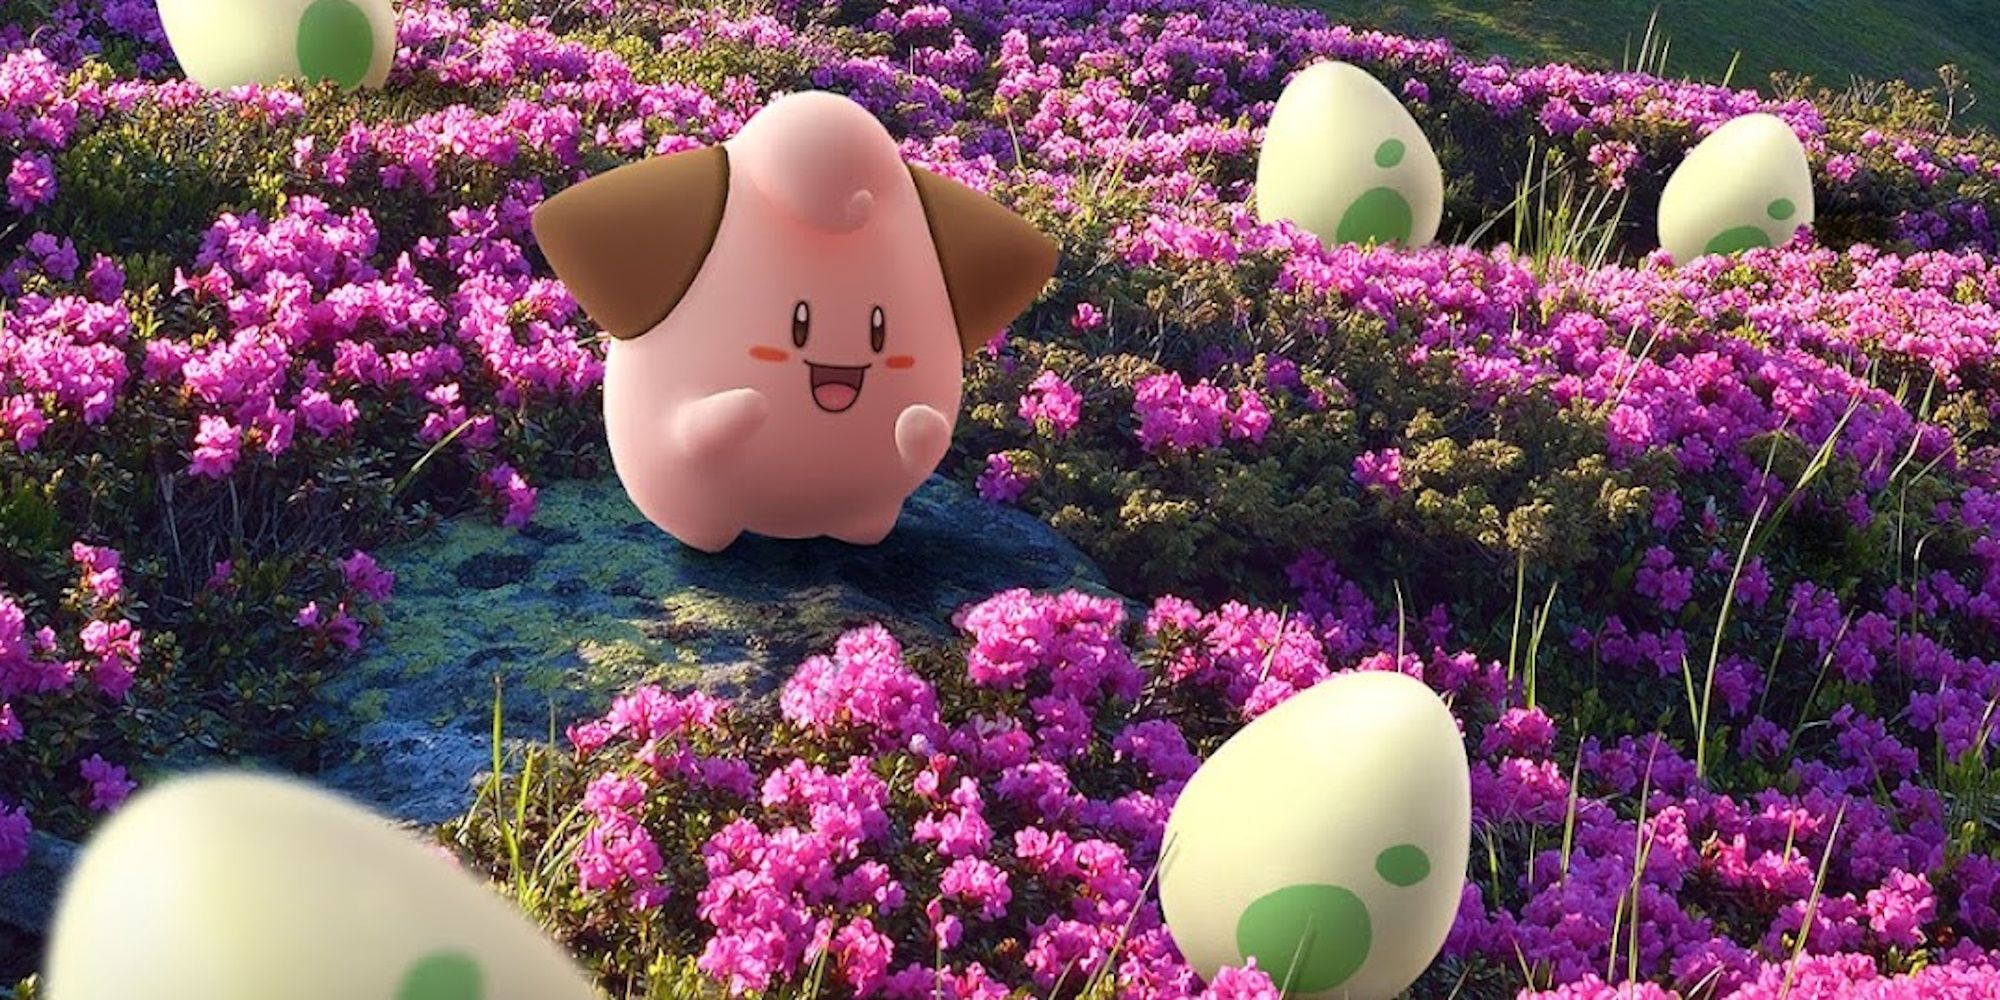 Image of Cleffa from Pokemon  in a flowery field surrounded by Pokemon Go Eggs